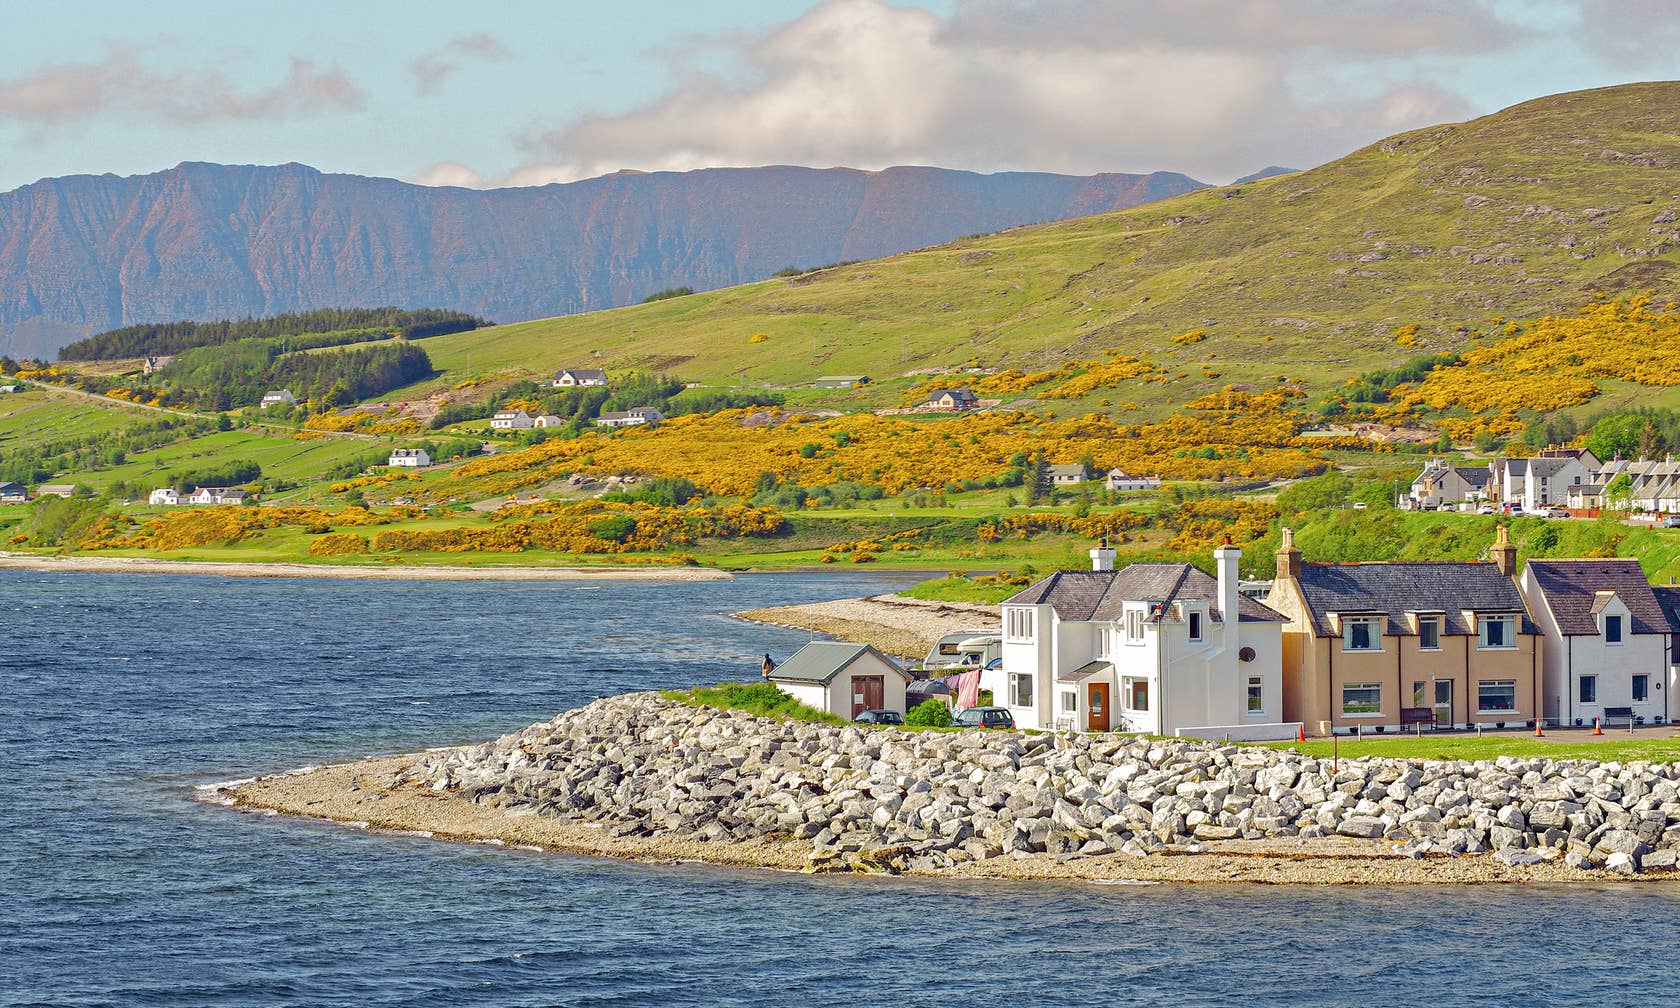 Holiday rental houses in Ullapool